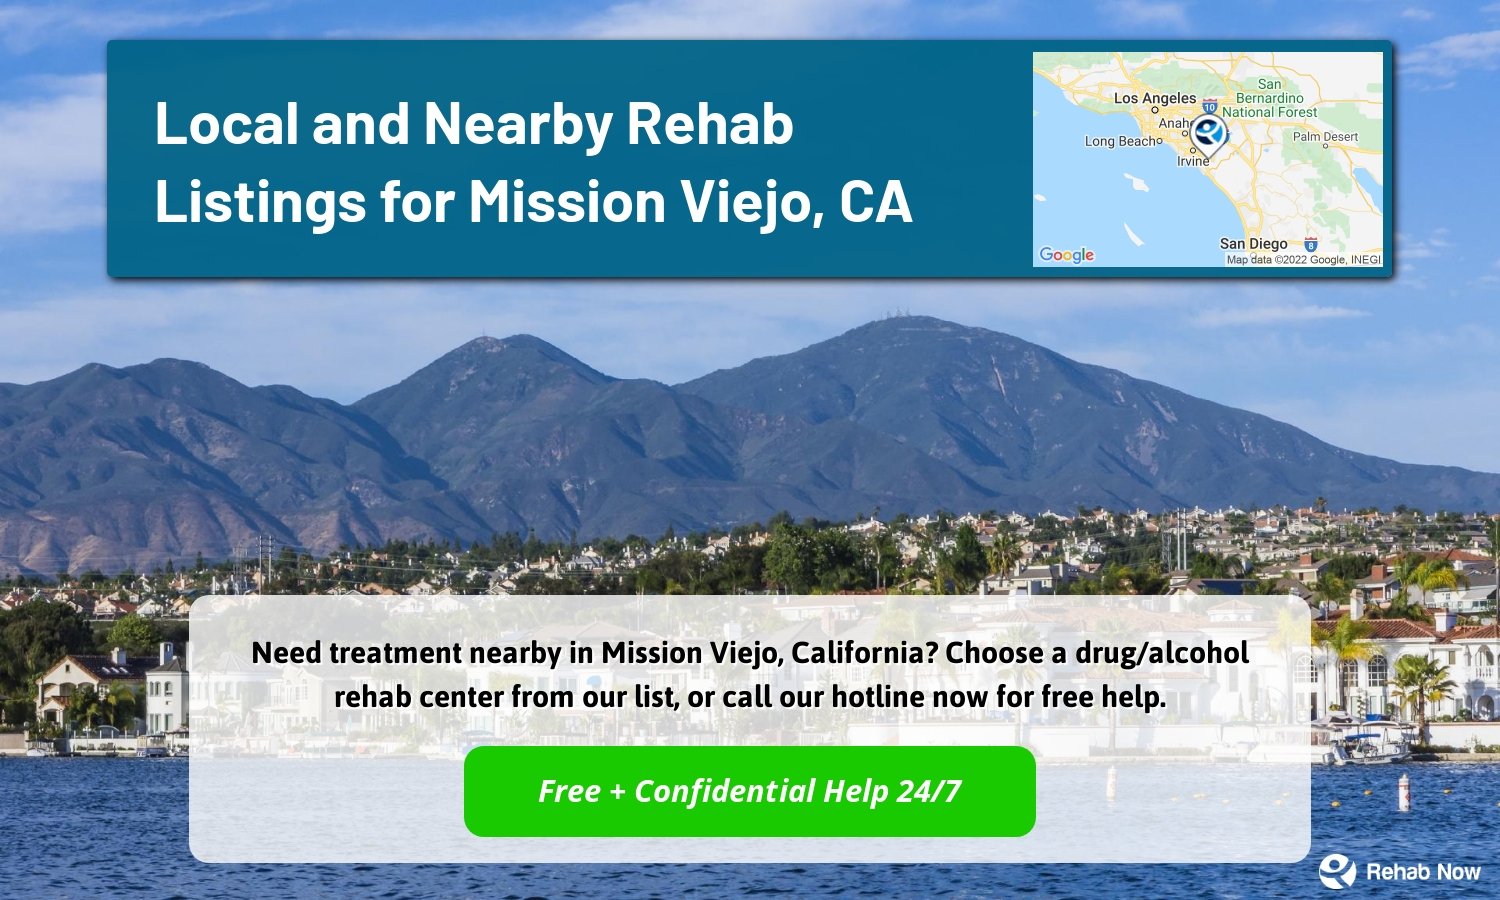 Need treatment nearby in Mission Viejo, California? Choose a drug/alcohol rehab center from our list, or call our hotline now for free help.